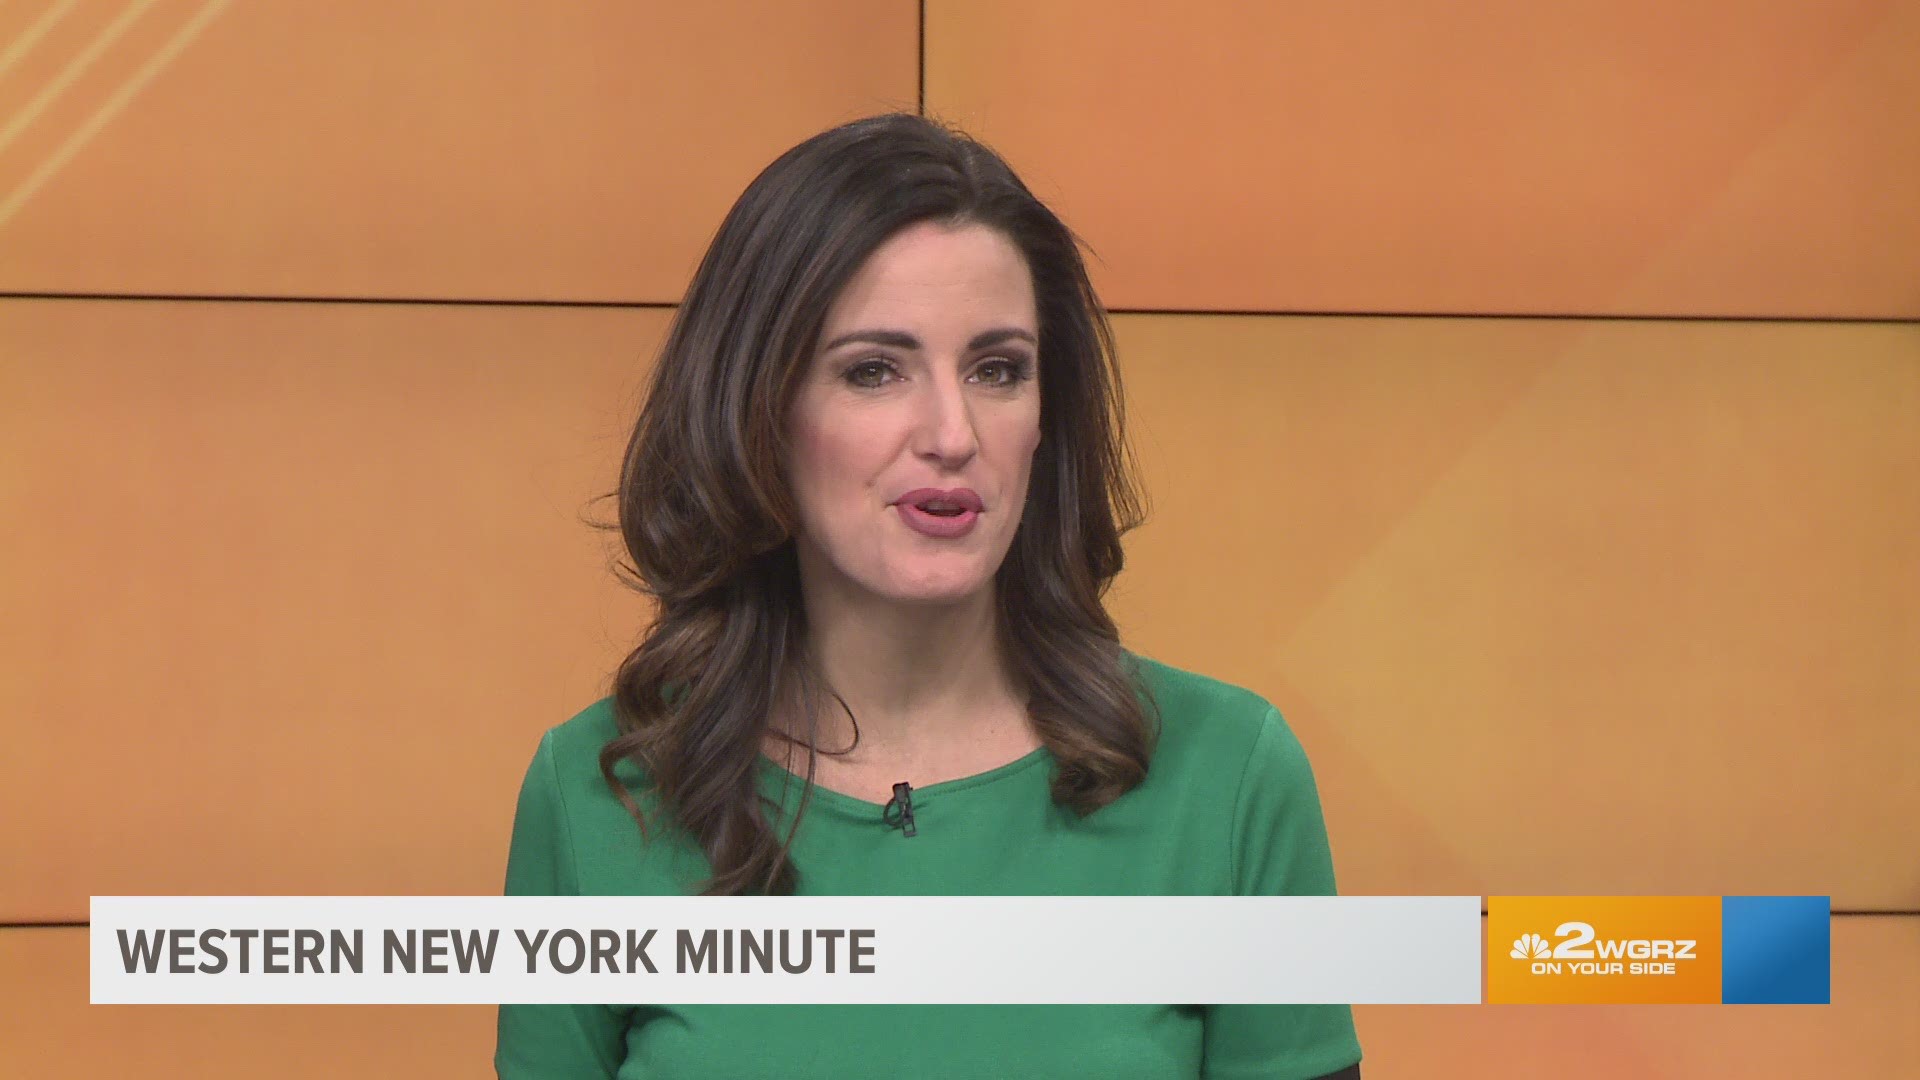 An update on a murder suspect out on bail, road work on a major WNY road, and looking ahead to this week's St. Patrick's day parades. All this and more in your Western New York Minute.